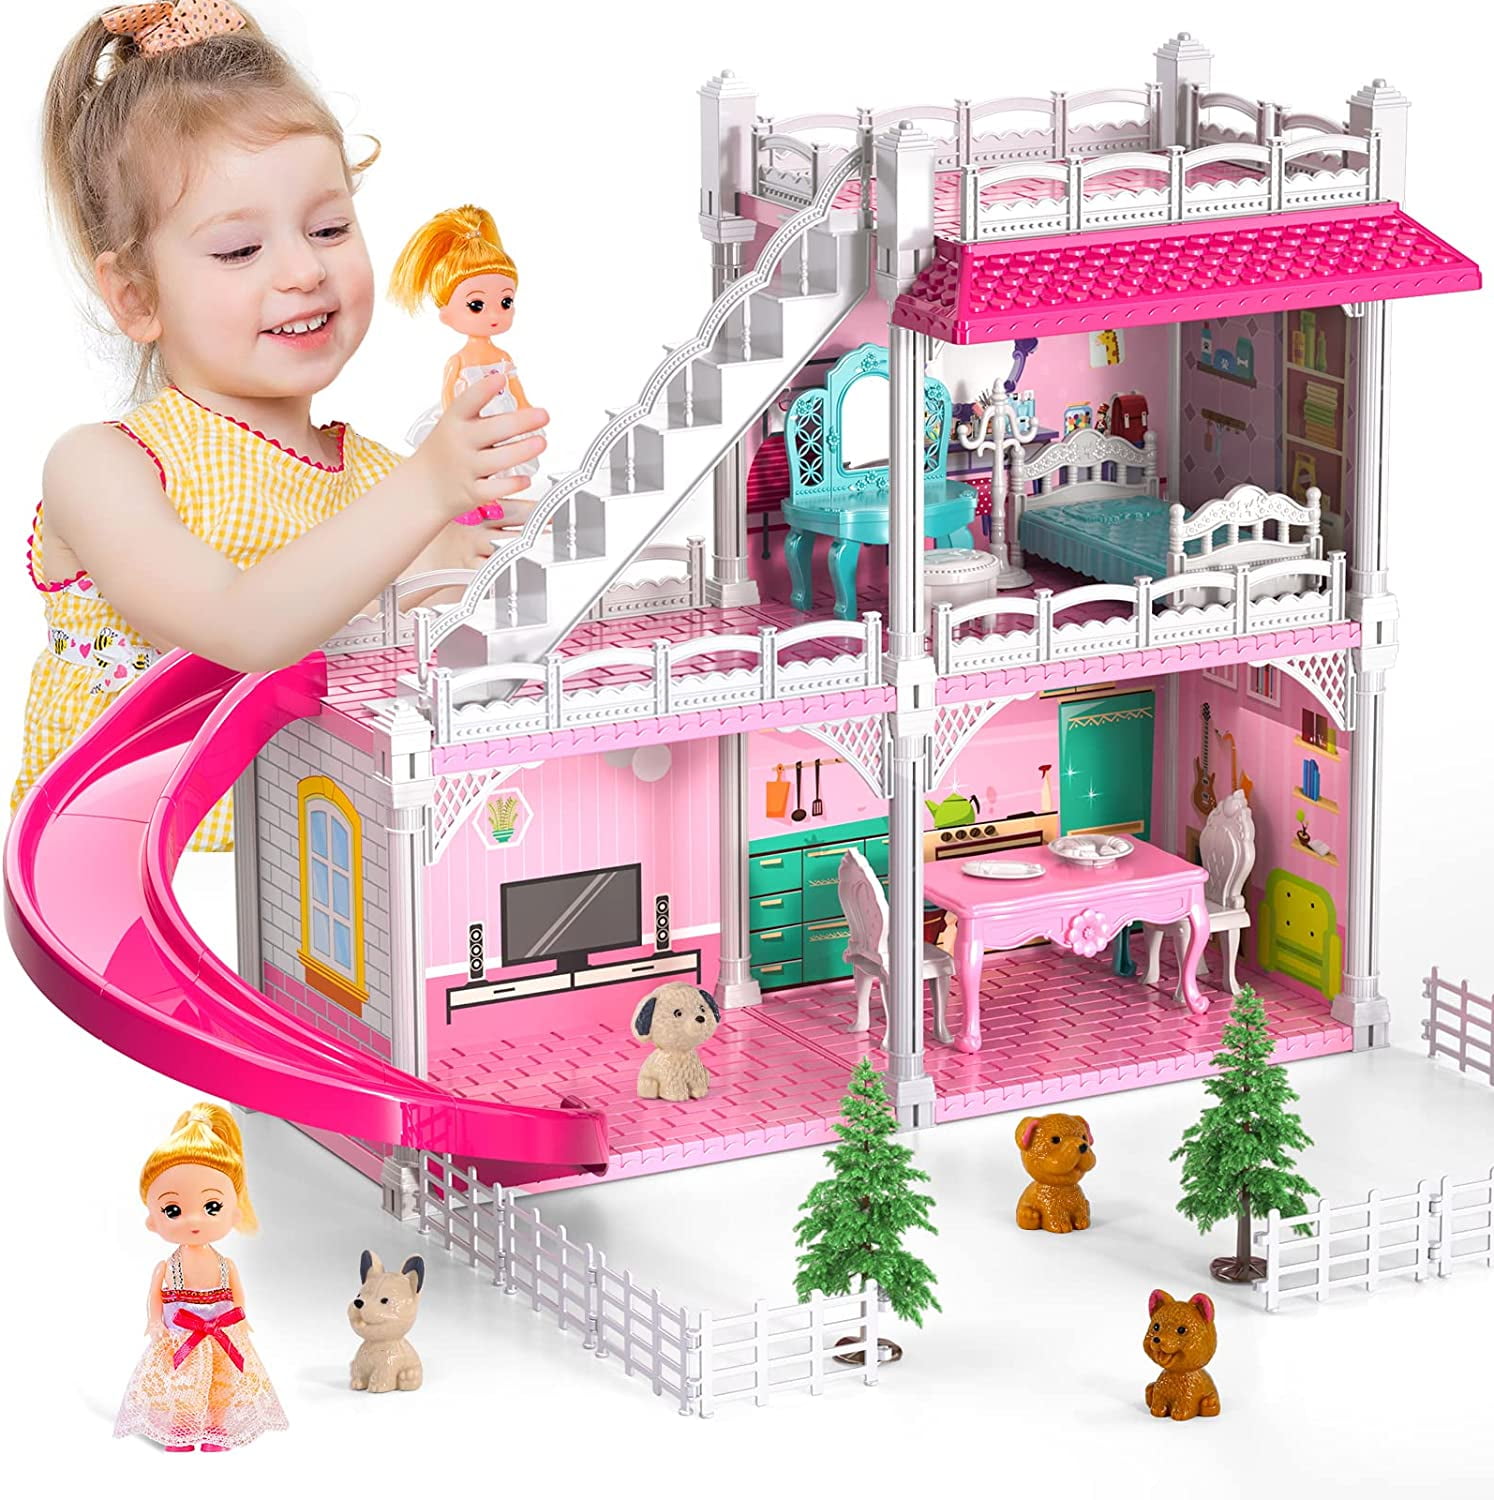 Dream Doll House 11 Rooms - nuheby